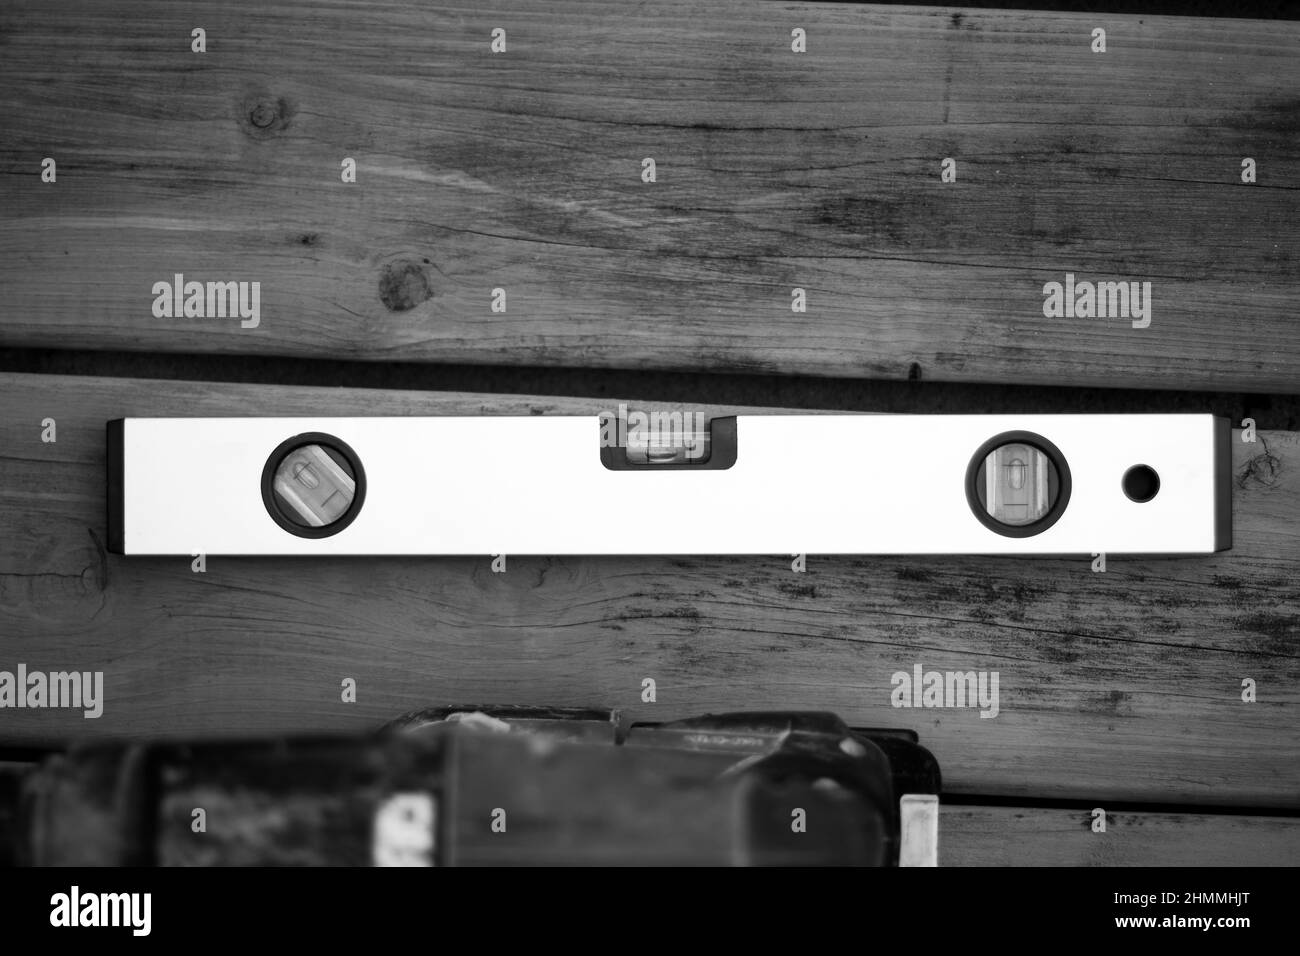 Black and white picture of a spirit level ruler on a wooden background. Stock Photo